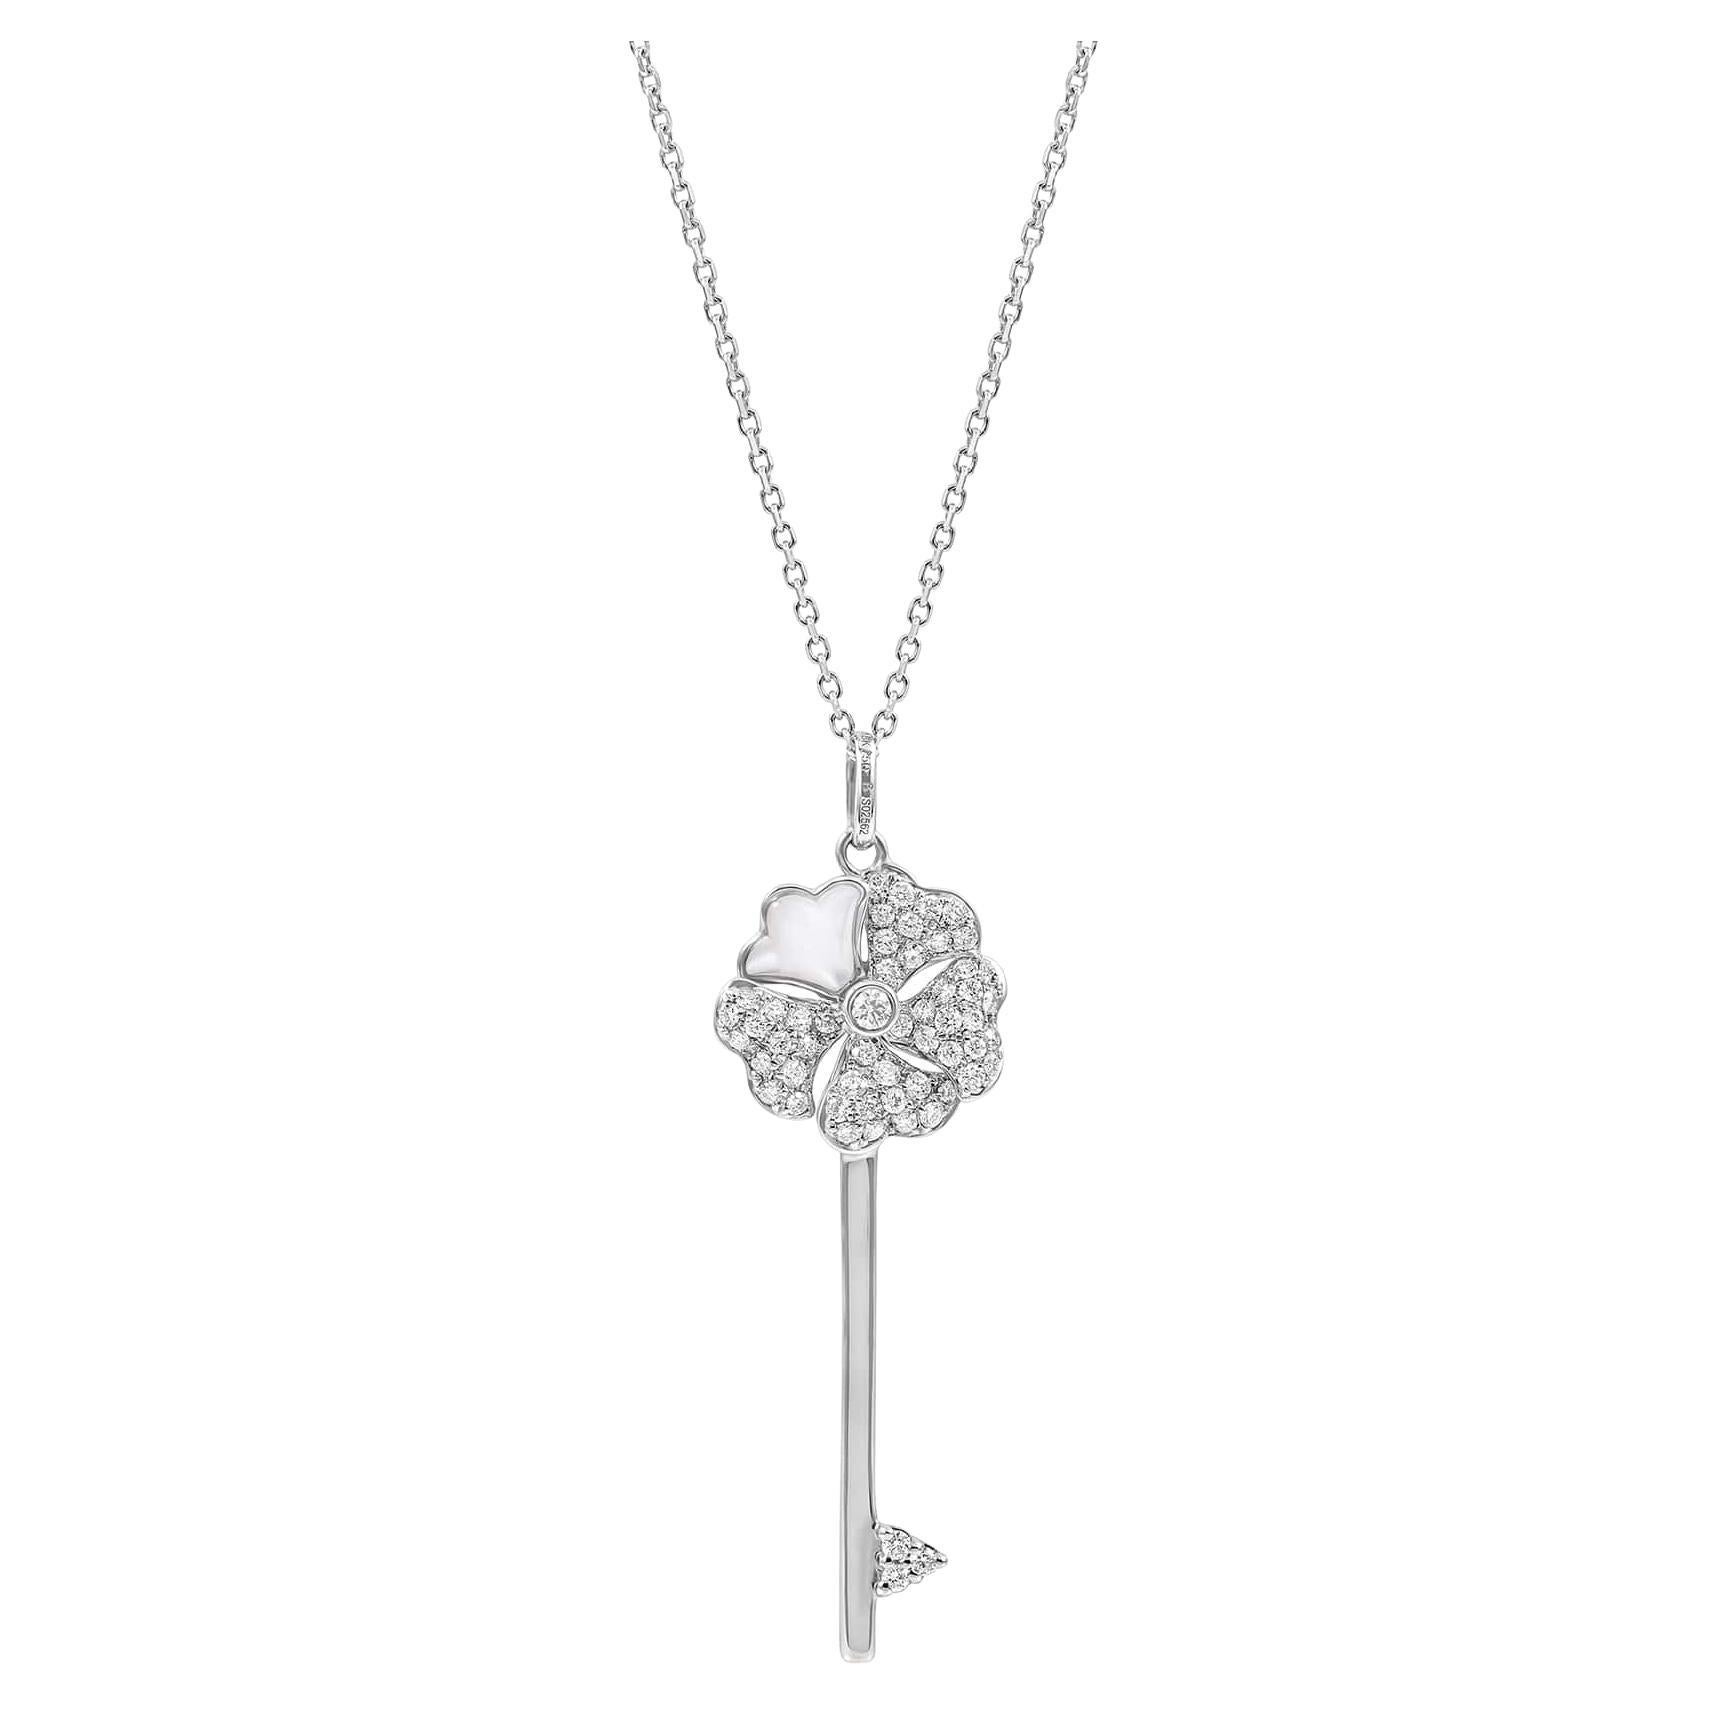 Bloom Diamond Key Necklace with Mother of Pearl in 18k White Gold